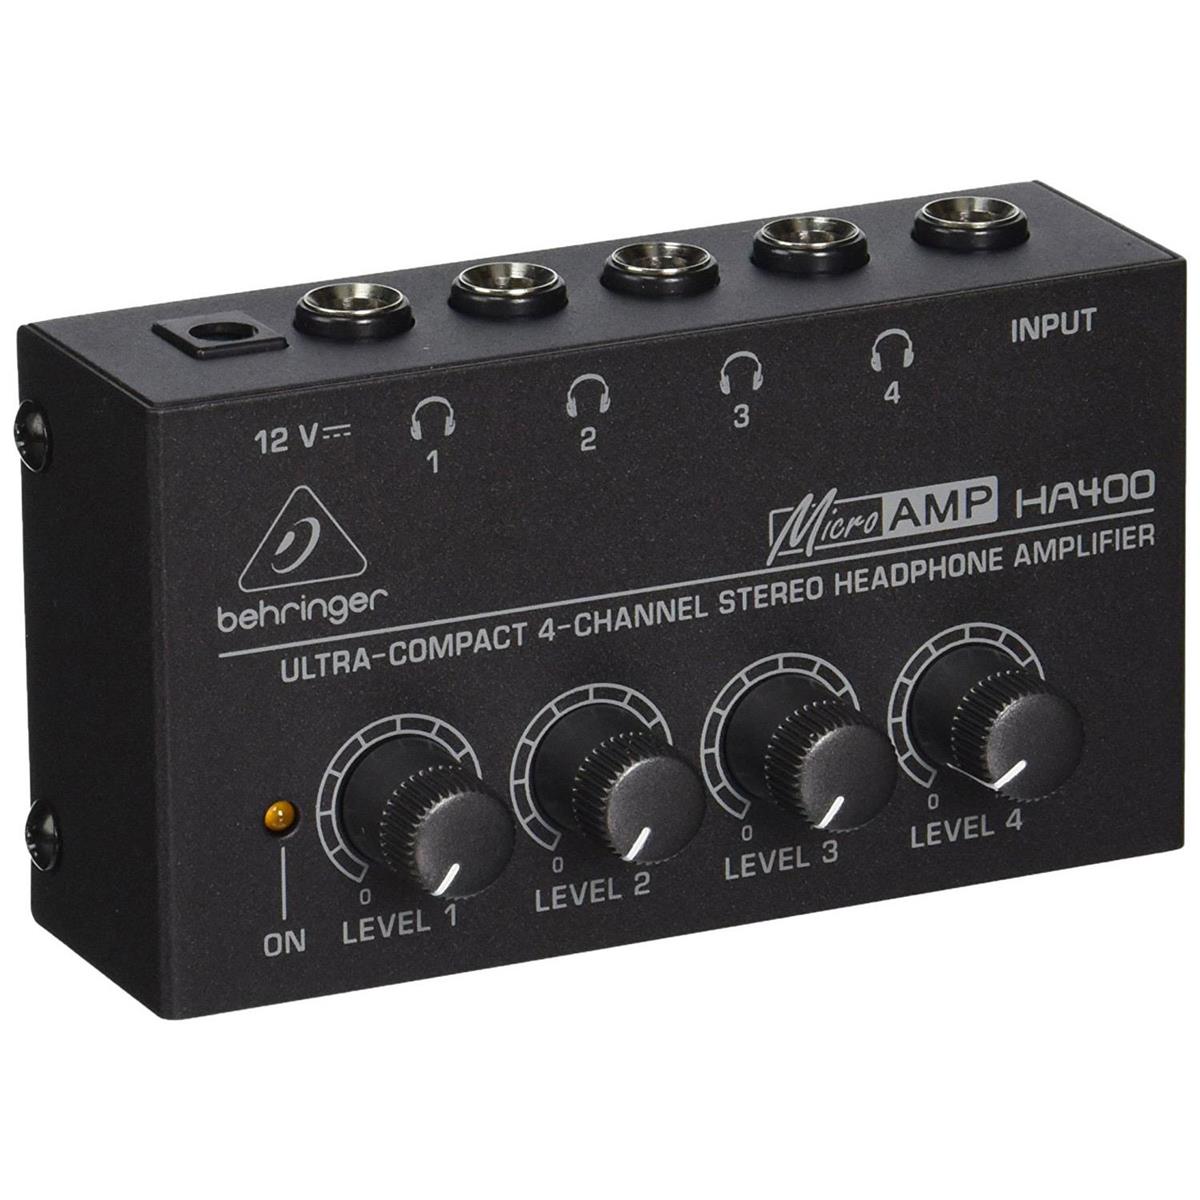 

Behringer HA-400 Ultra Compact 4-Channel Stereo Headphone Amplifier